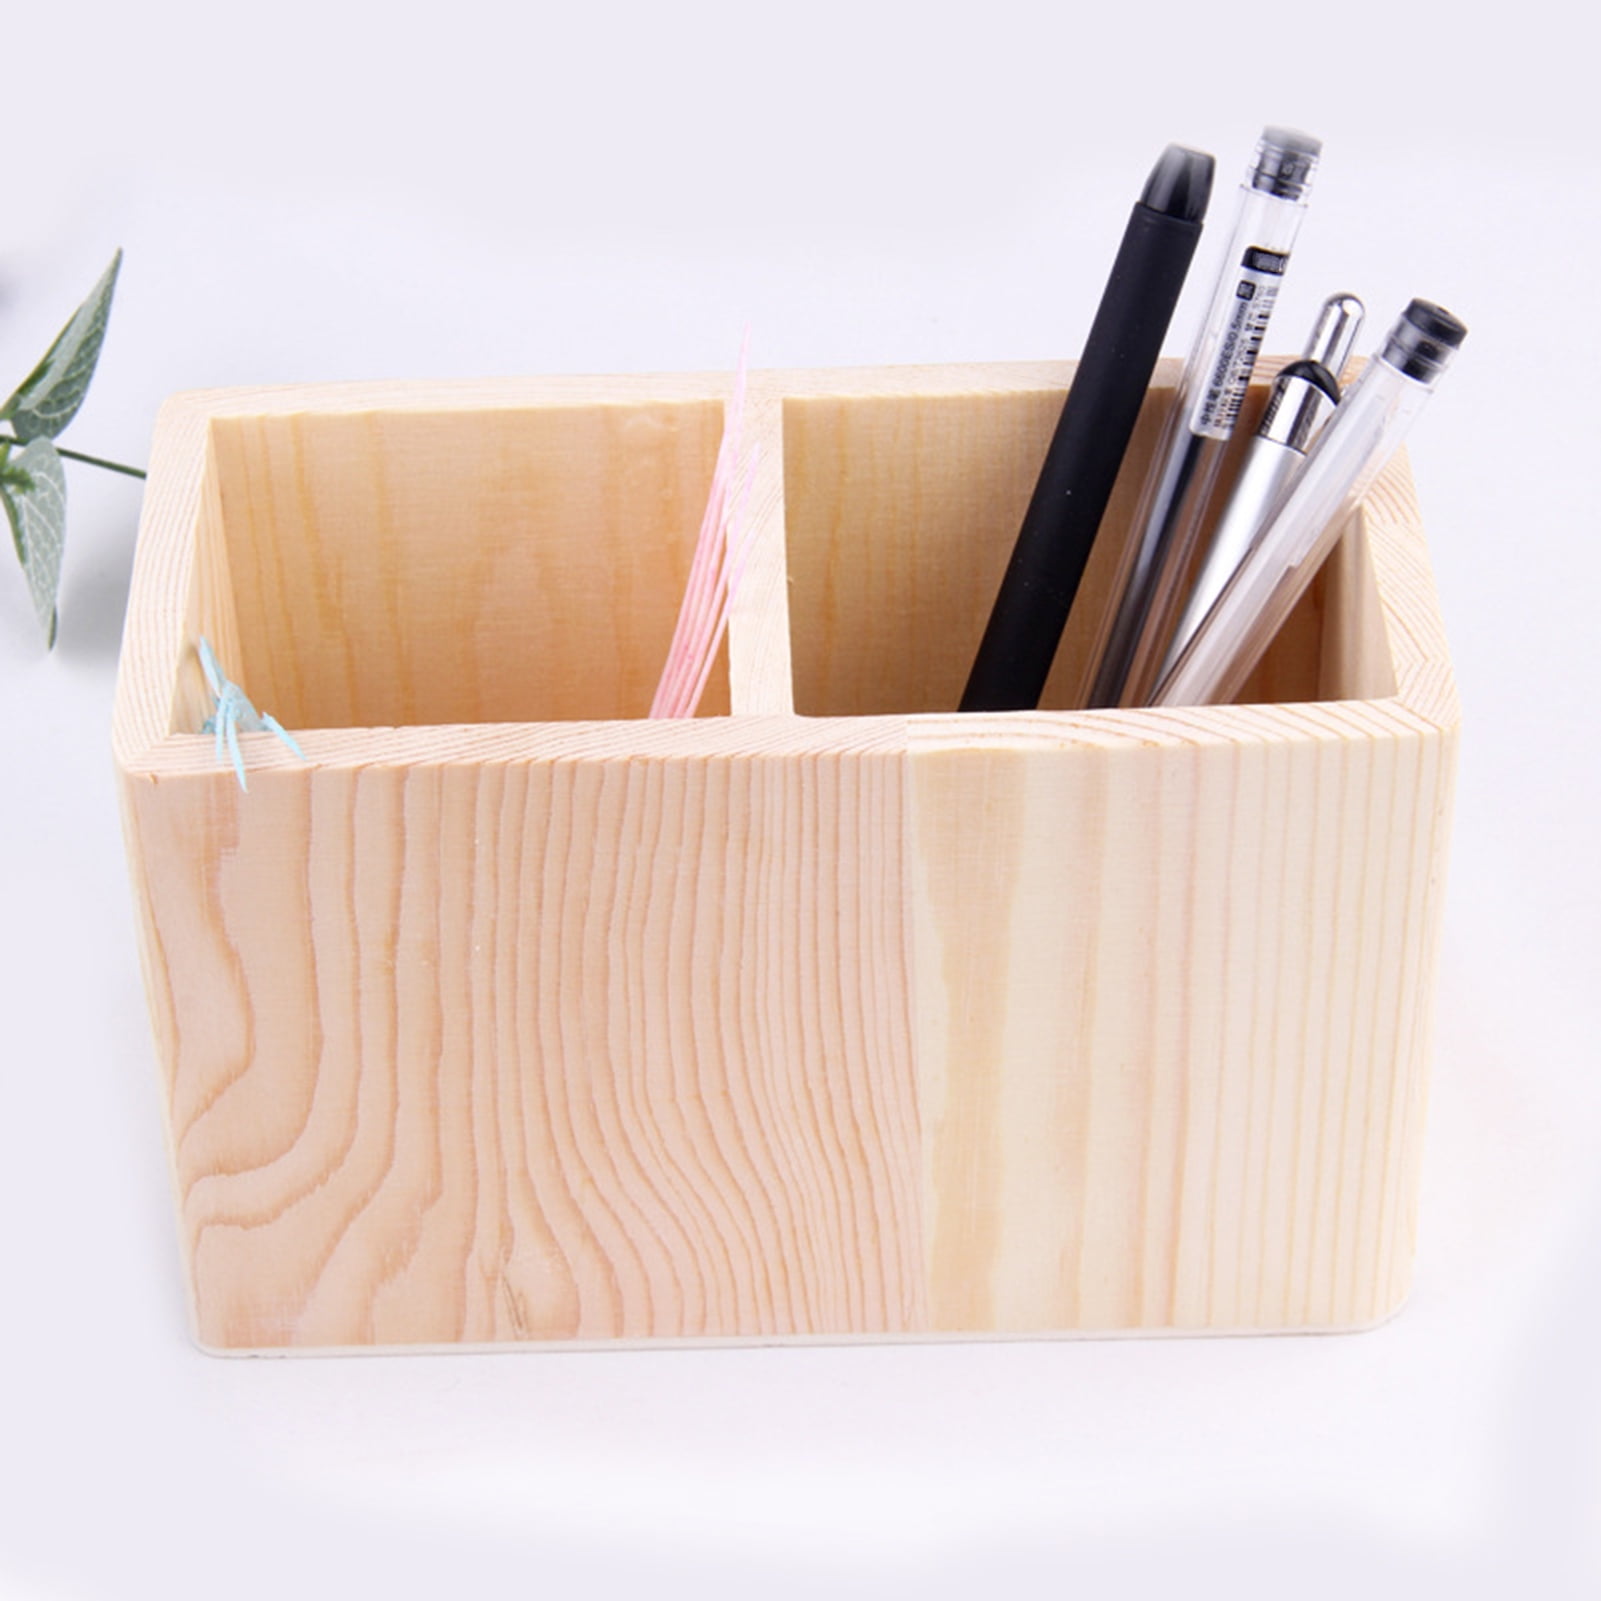  NUOBESTY Box Vintage Pen Cup Holder Tabletop Pen Holders  Pencils in Bulk Wood Pen Holder Kids Kickstand Makeup Pencil Container  Suits for Men Stationery Organizer Desk Appendix Wooden : Office Products